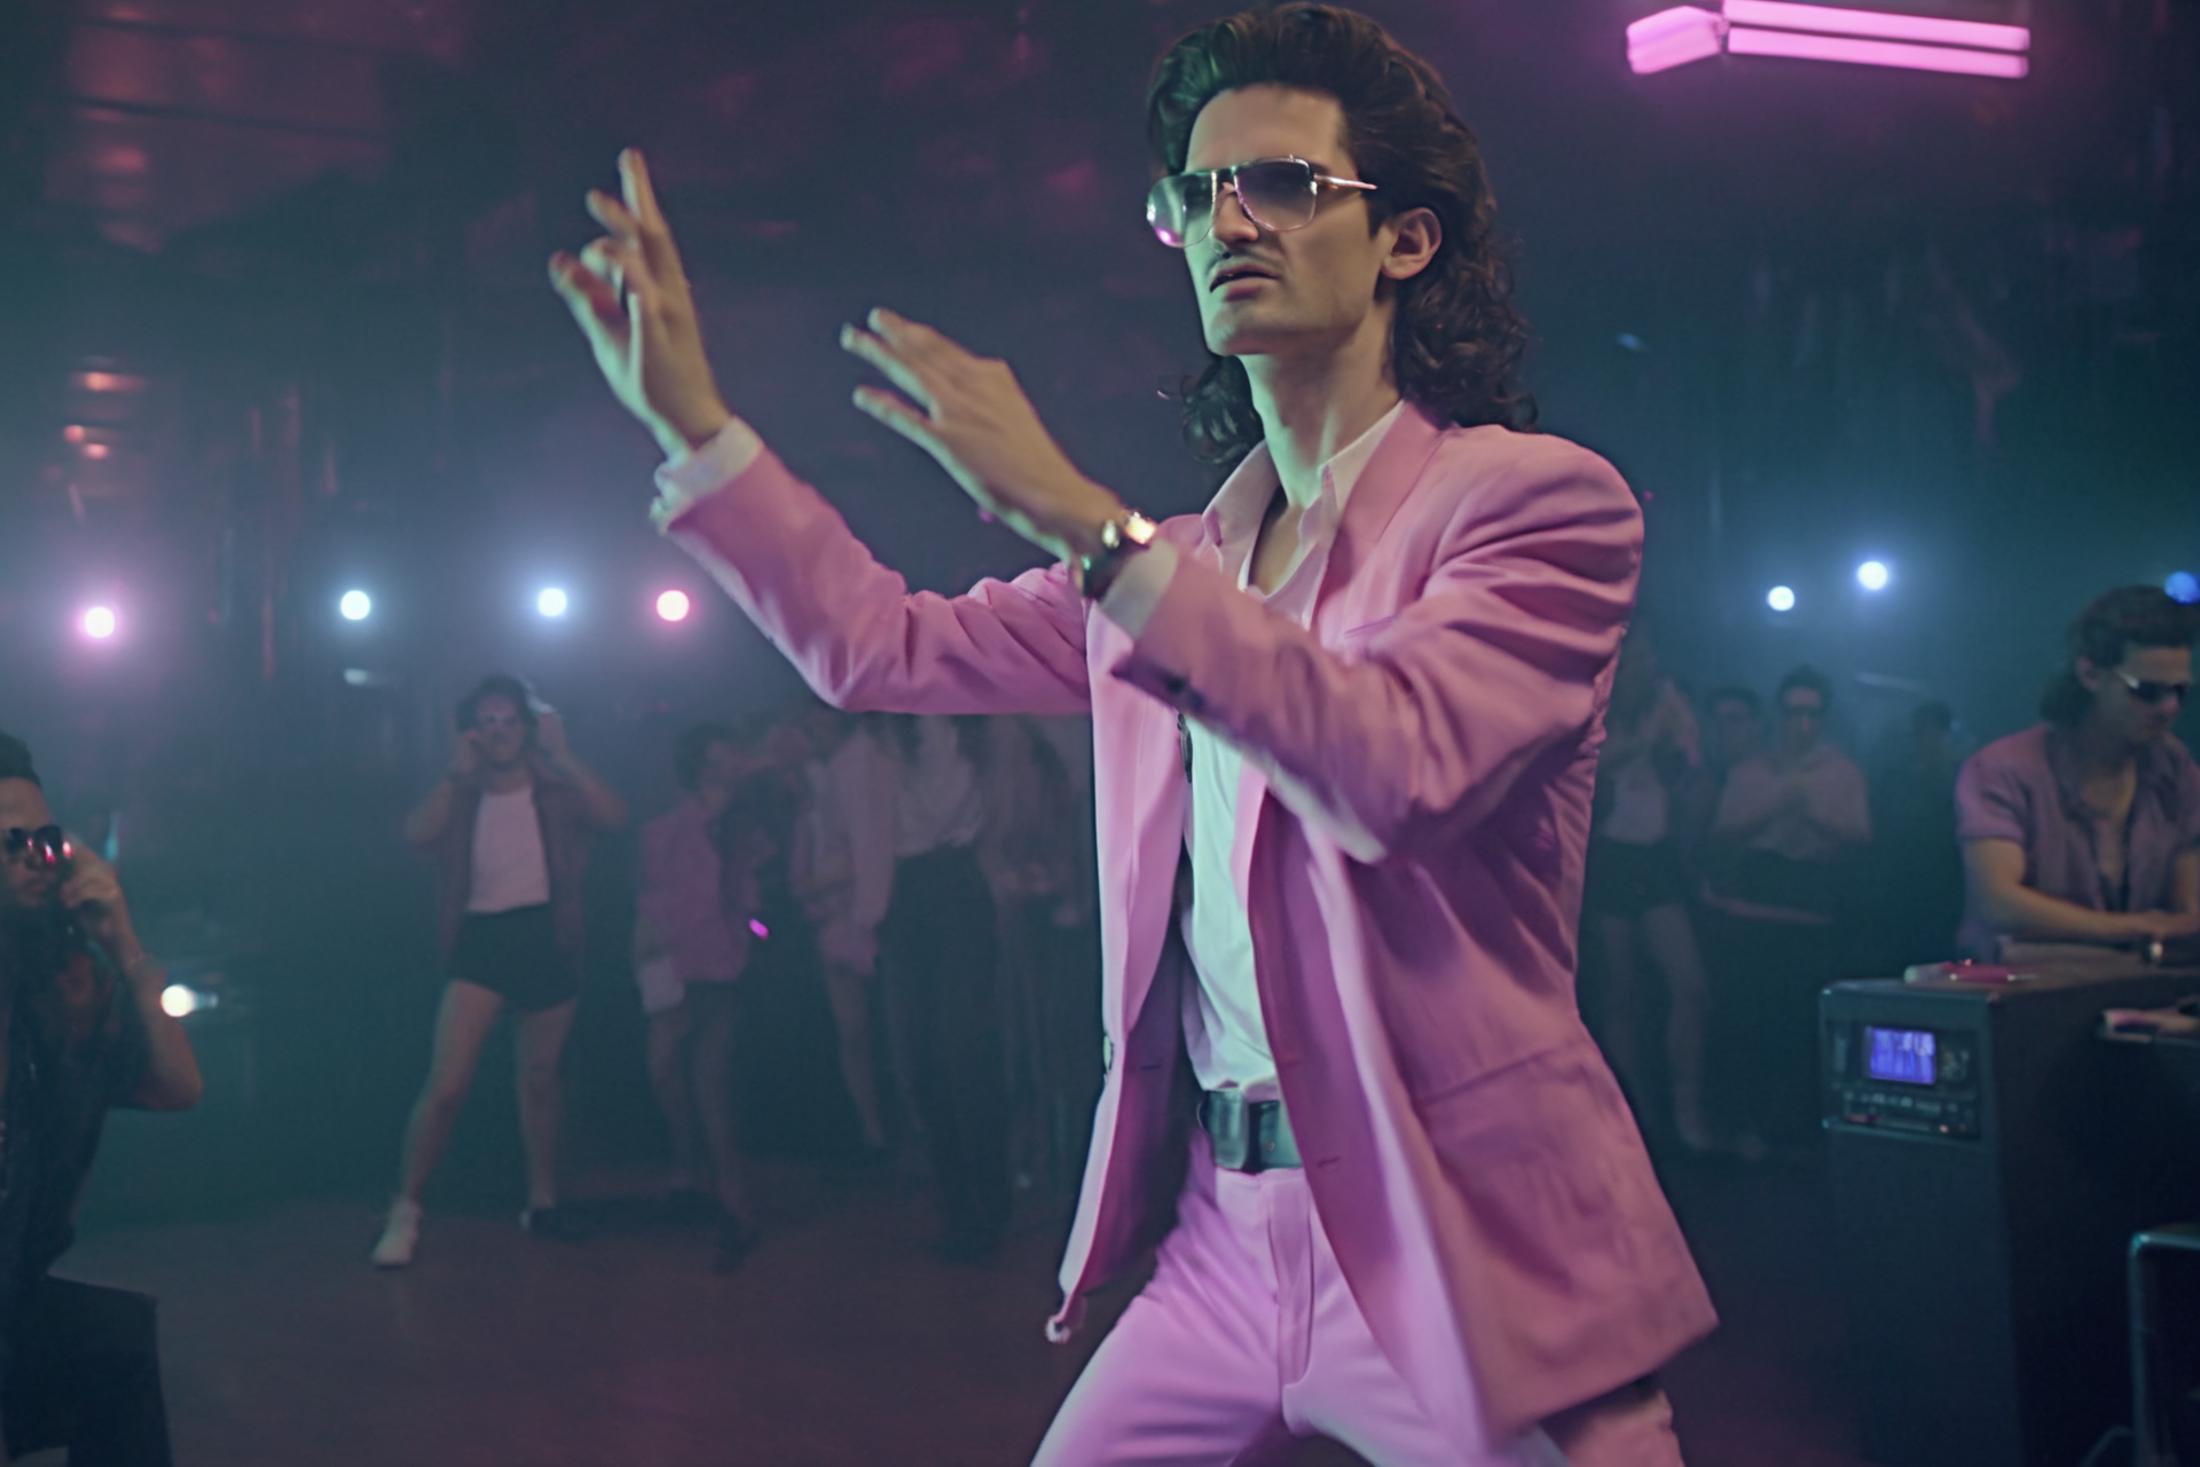 A man in a pink suit dancing and wearing sunglasses.